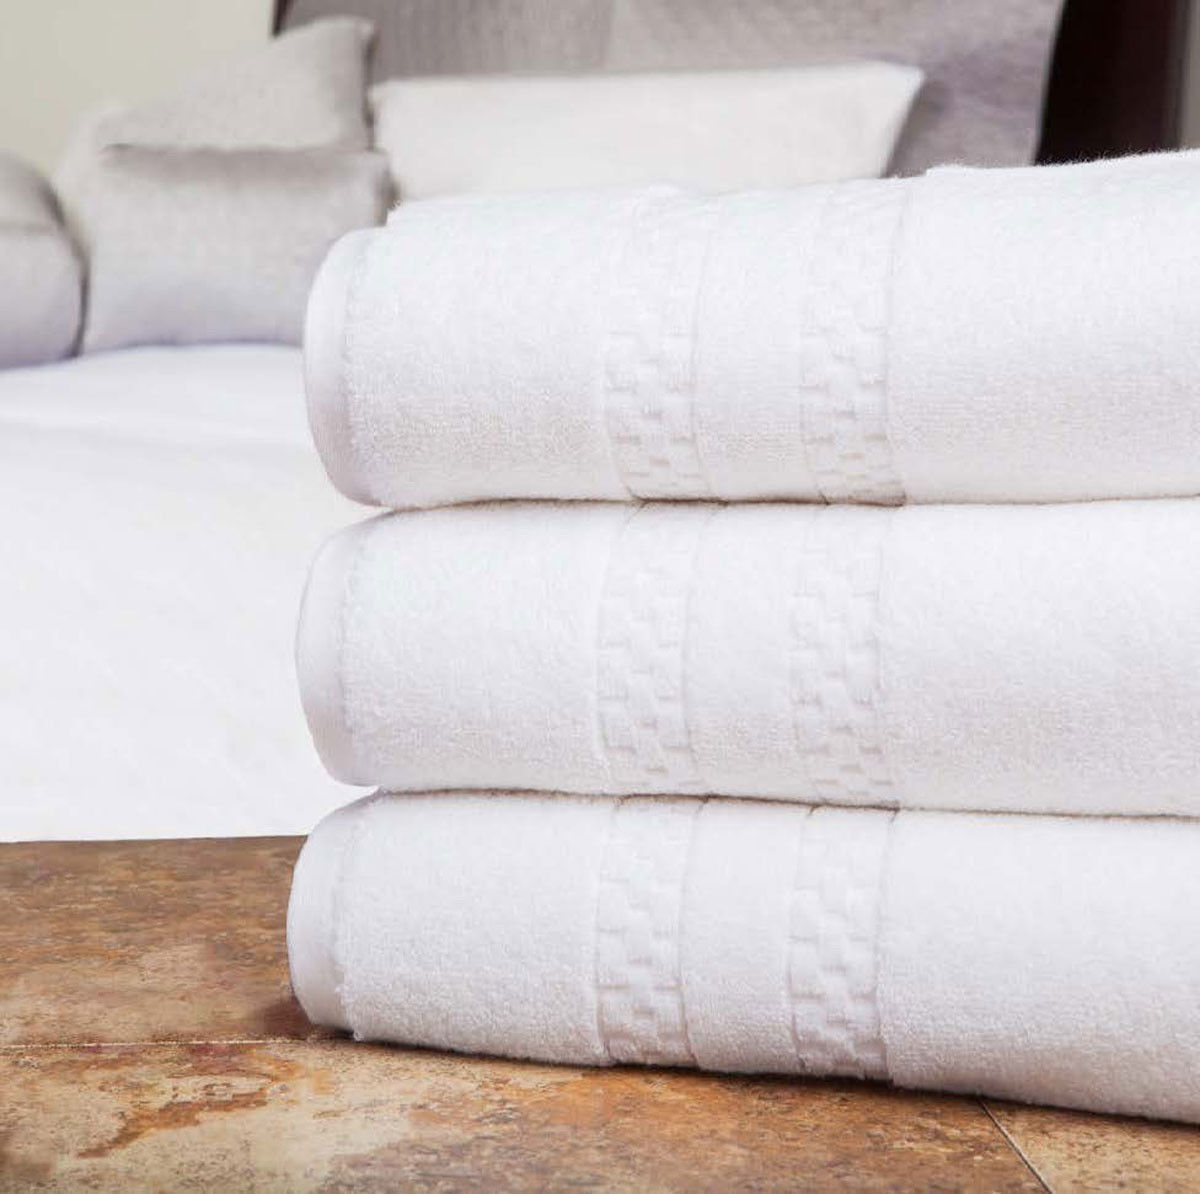 Is the product described villa di lusso towels?